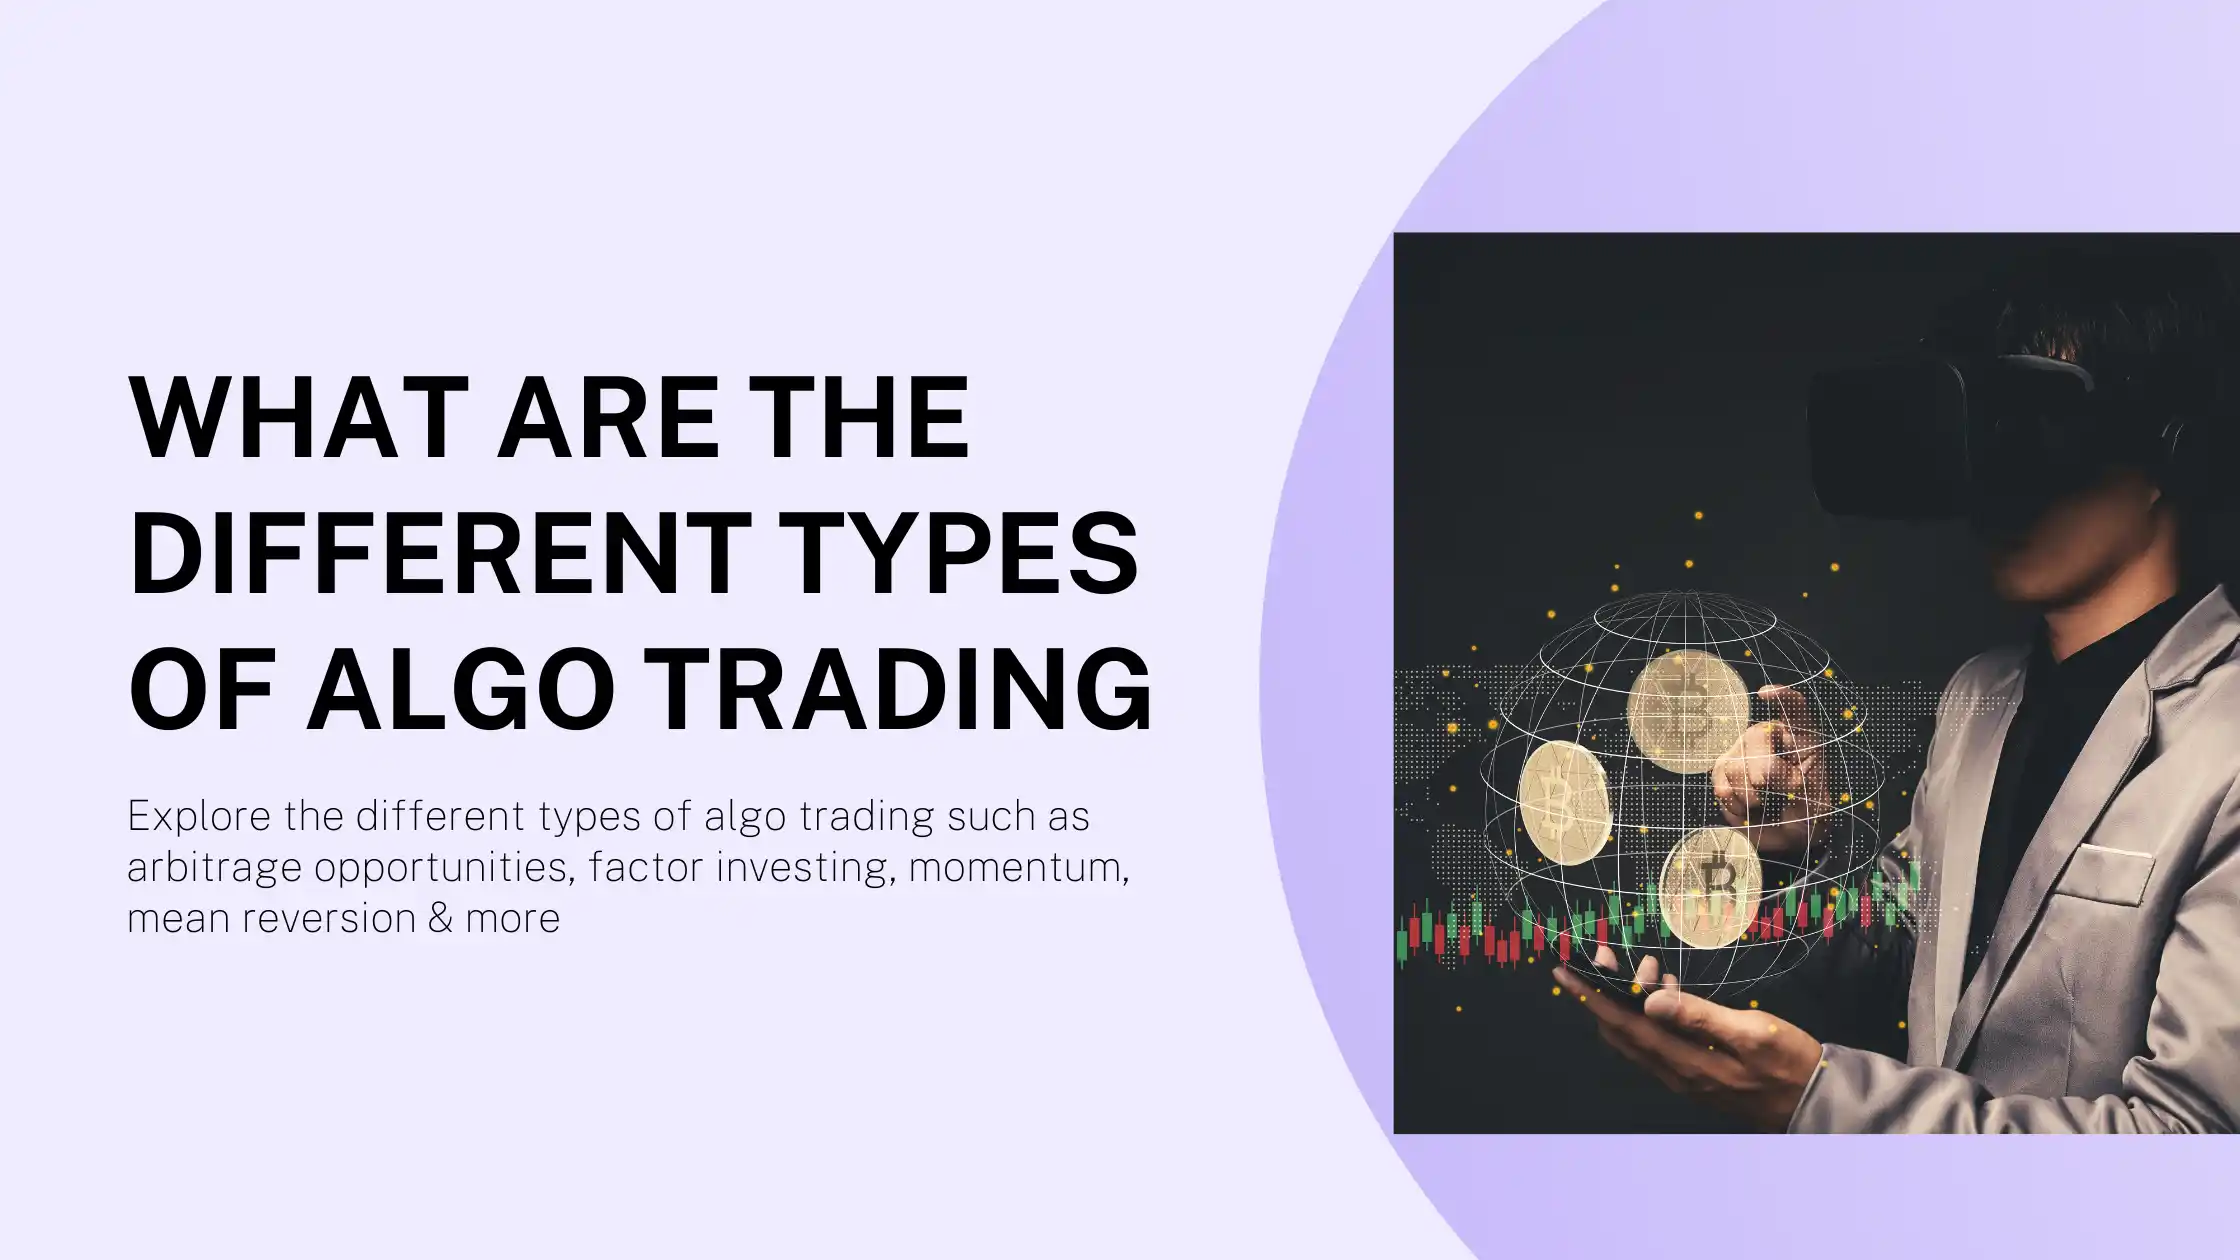 What are the different types of Algo Trading?